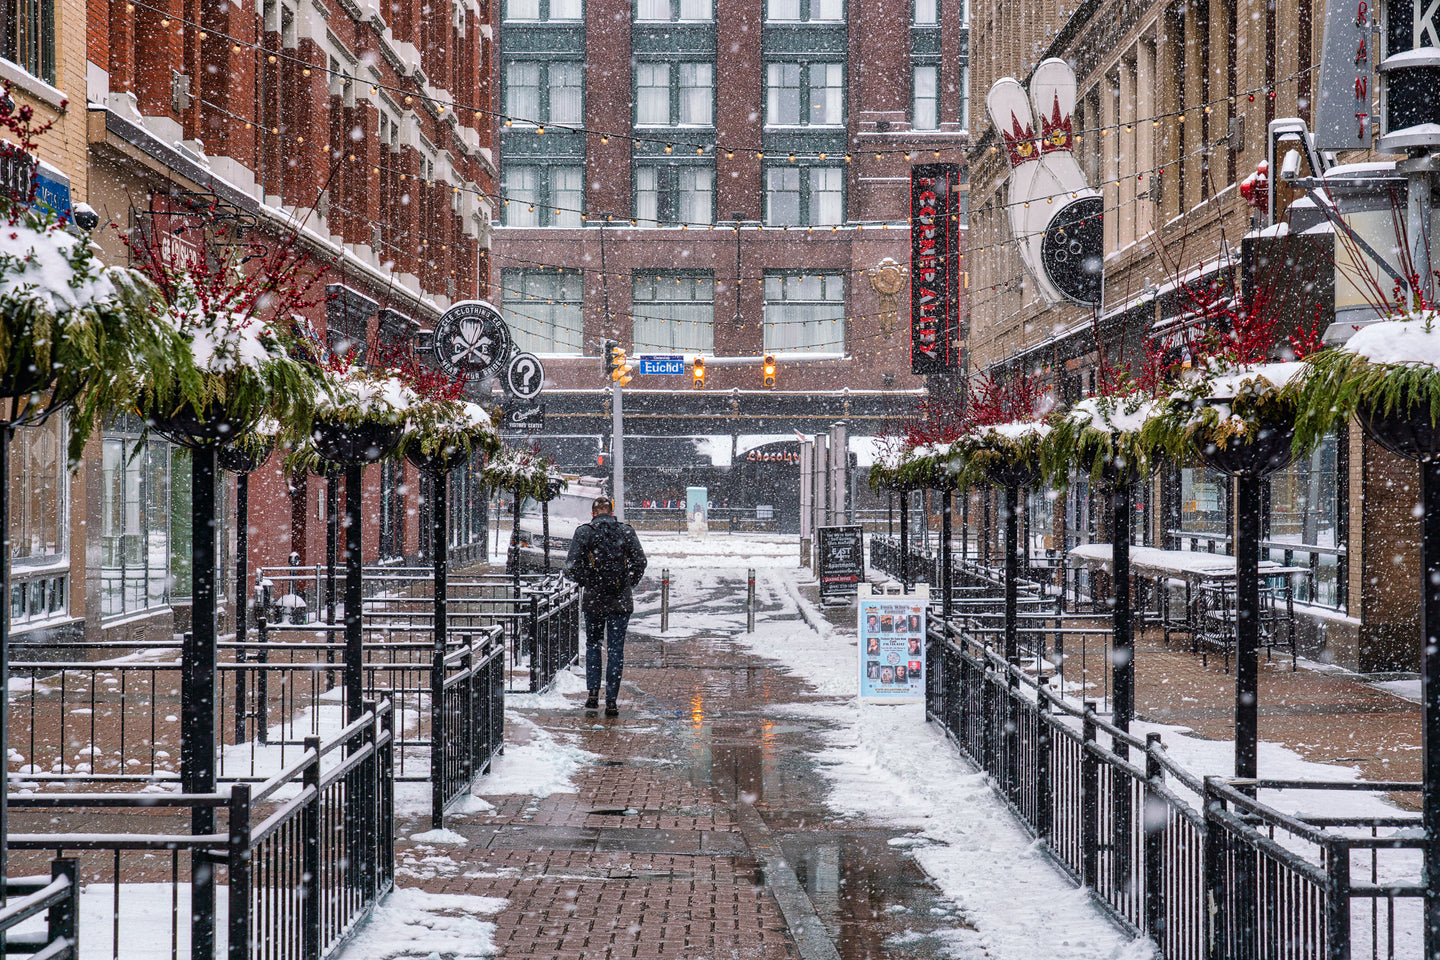 East 4th on a Snowy Day